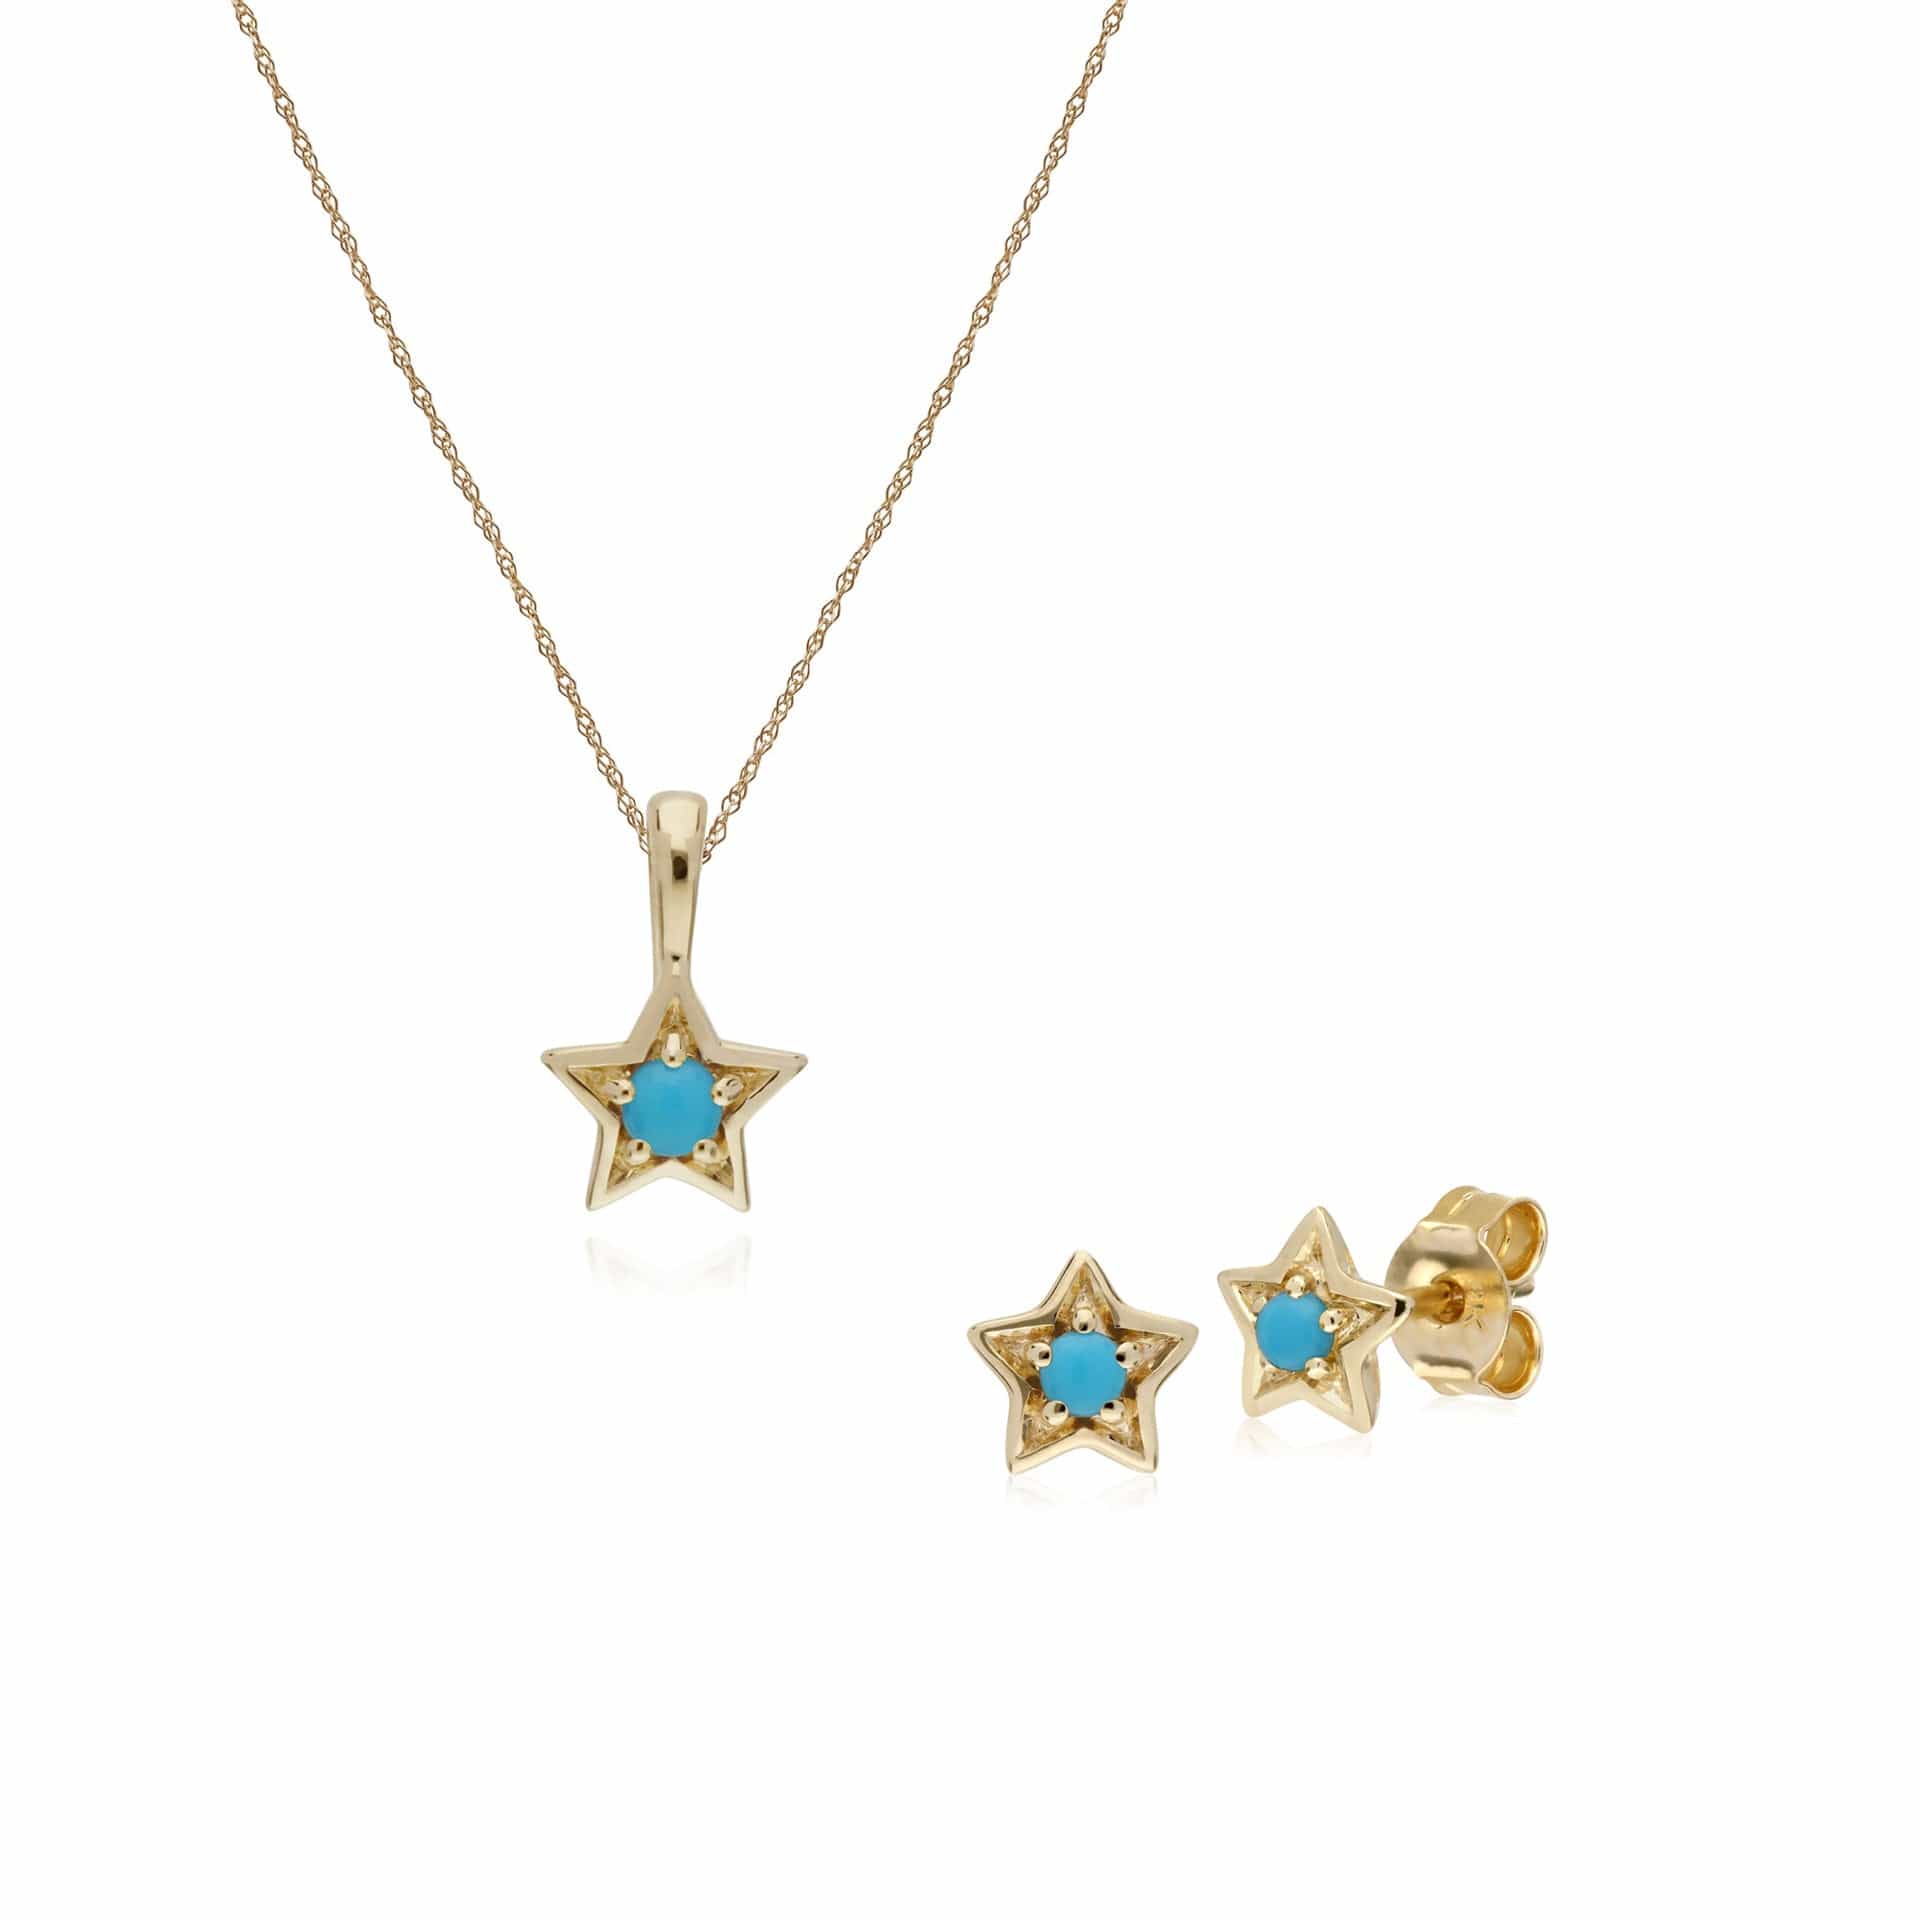 135E1565019-135P1903019 Contemporary Round Turquoise Single Stone Star Earrings & Necklace Set in 9ct Yellow Gold 1